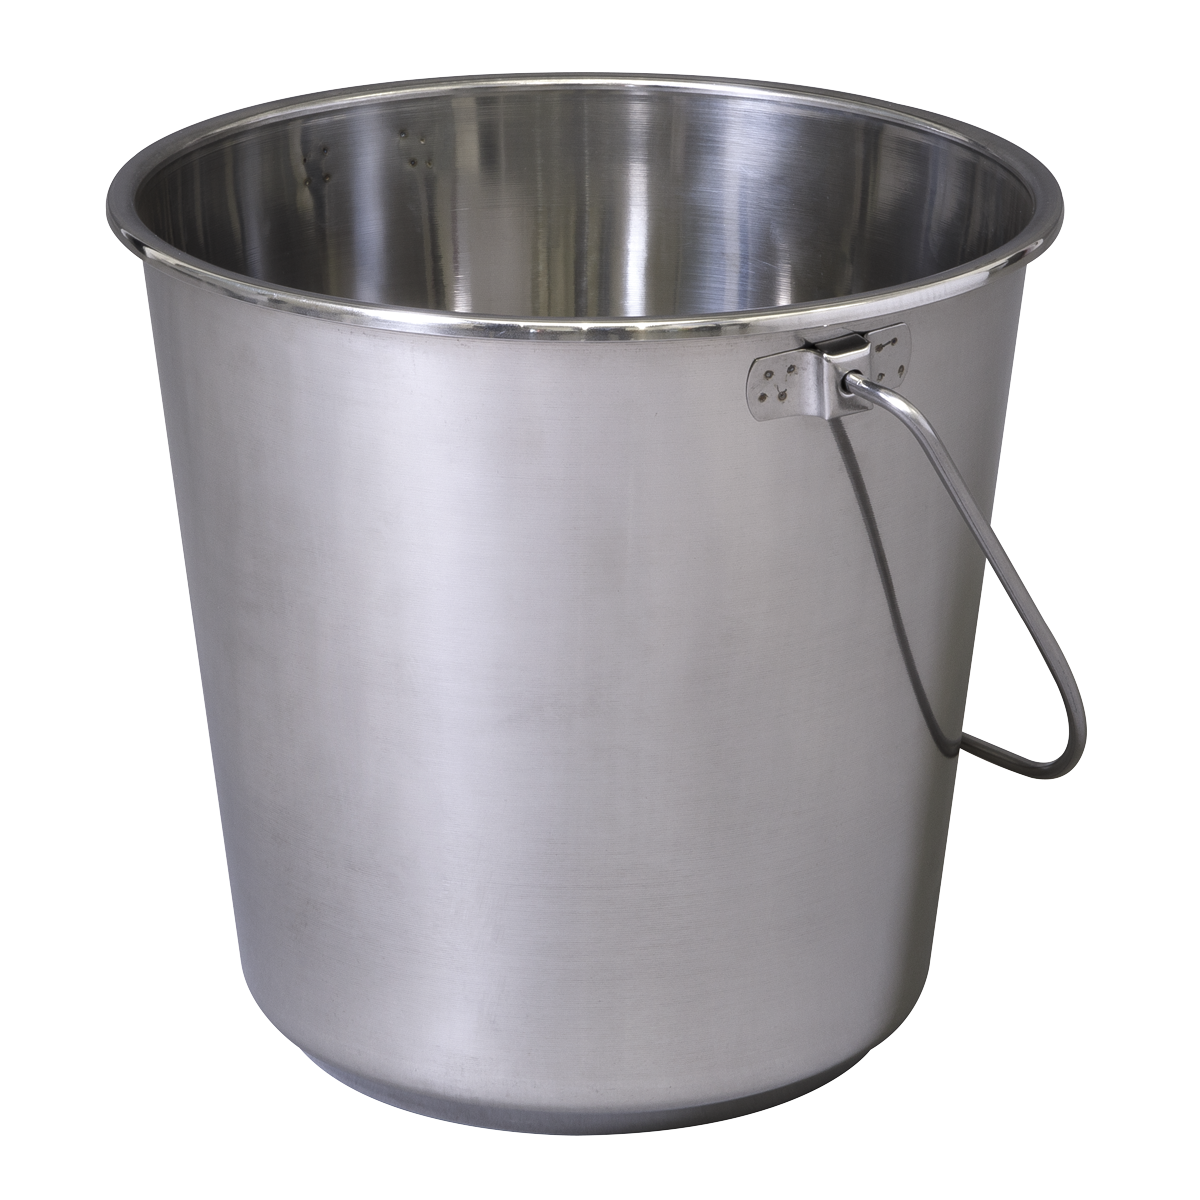 Mop Bucket 12L - Stainless Steel Image 1 Thumbnail